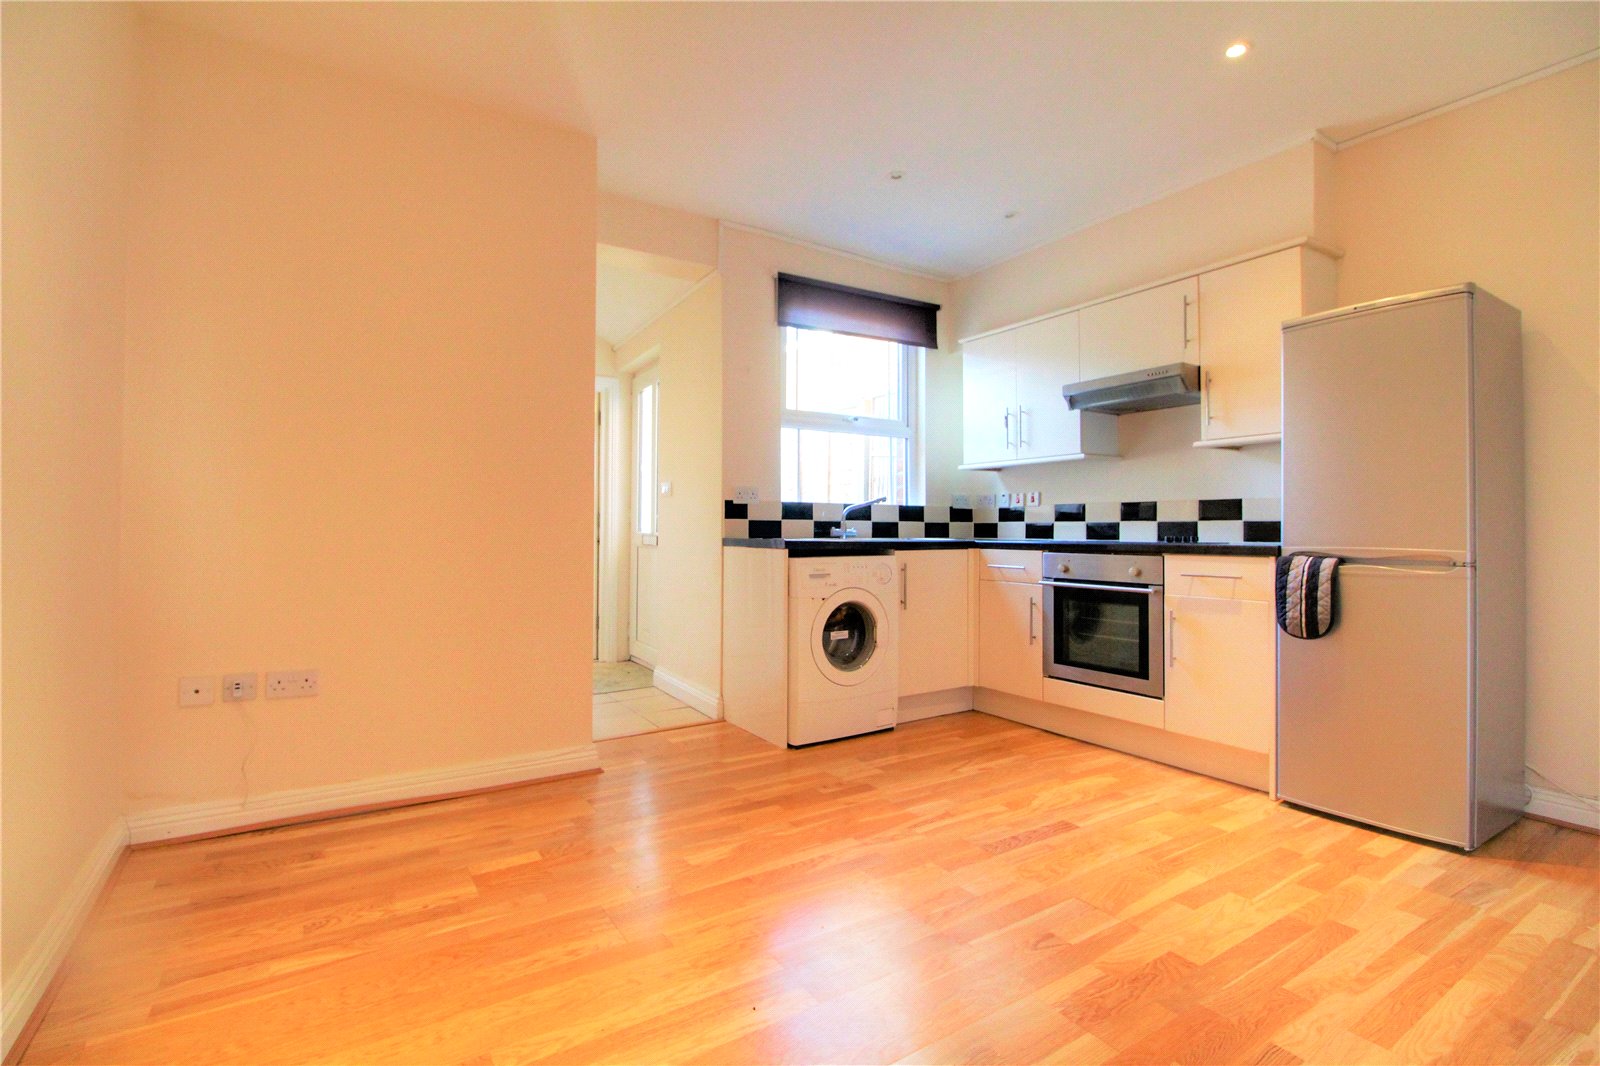 Parkers Reading 1 Bedroom Flat To Let In Southampton Street